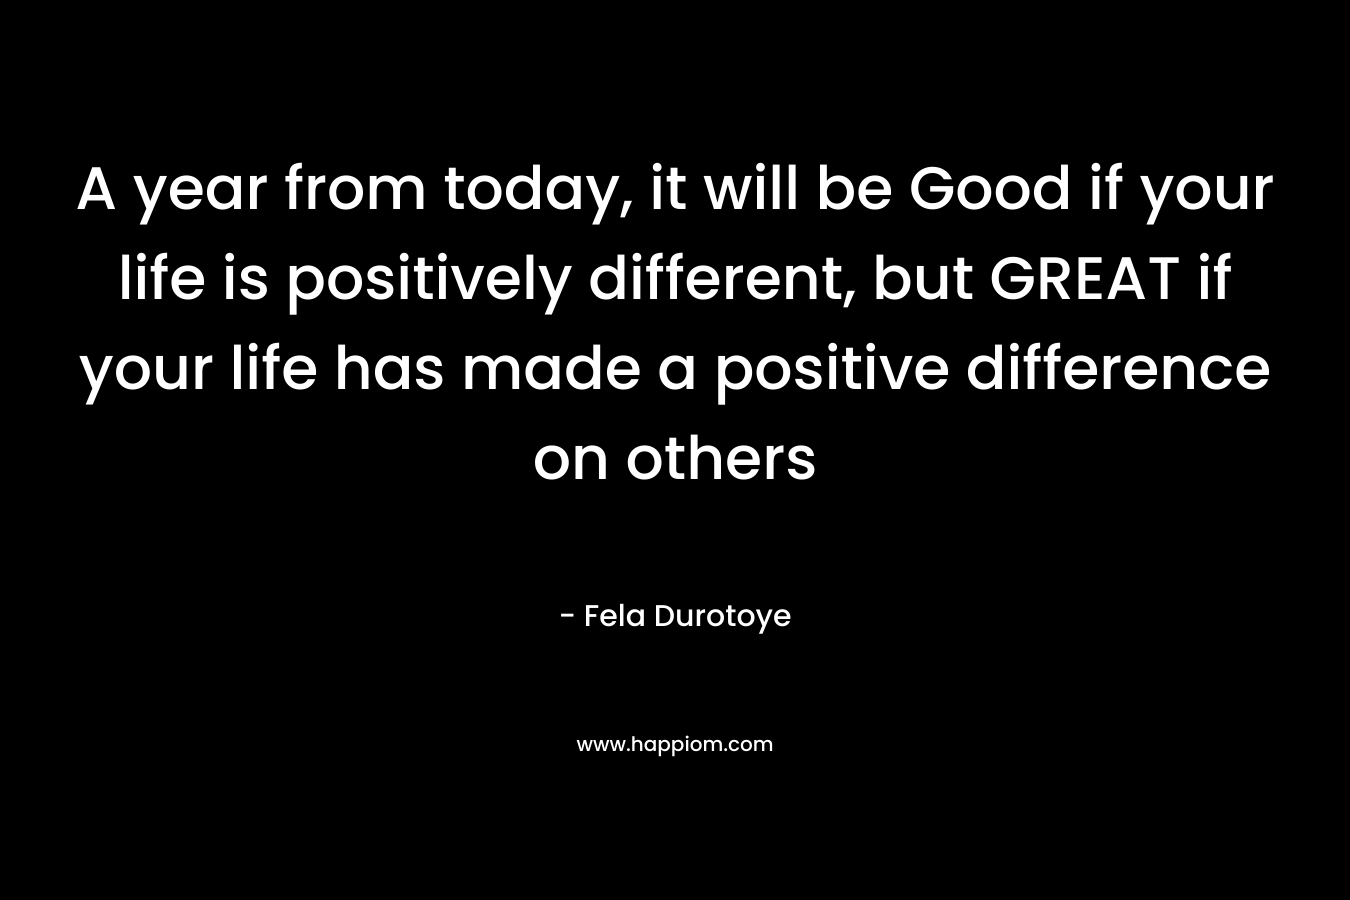 A year from today, it will be Good if your life is positively different, but GREAT if your life has made a positive difference on others